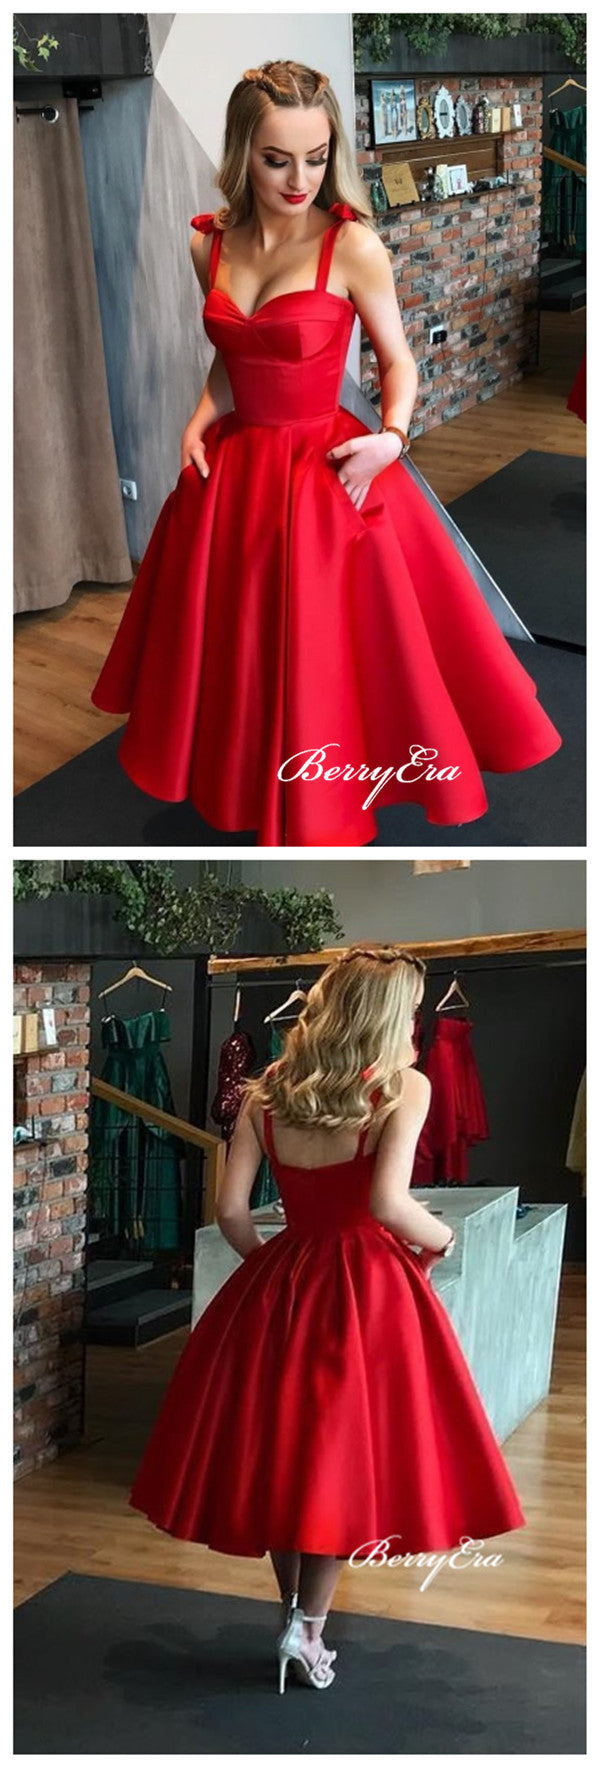 Red Color Homecoming Dresses, Popular A-line Short Prom Dresses